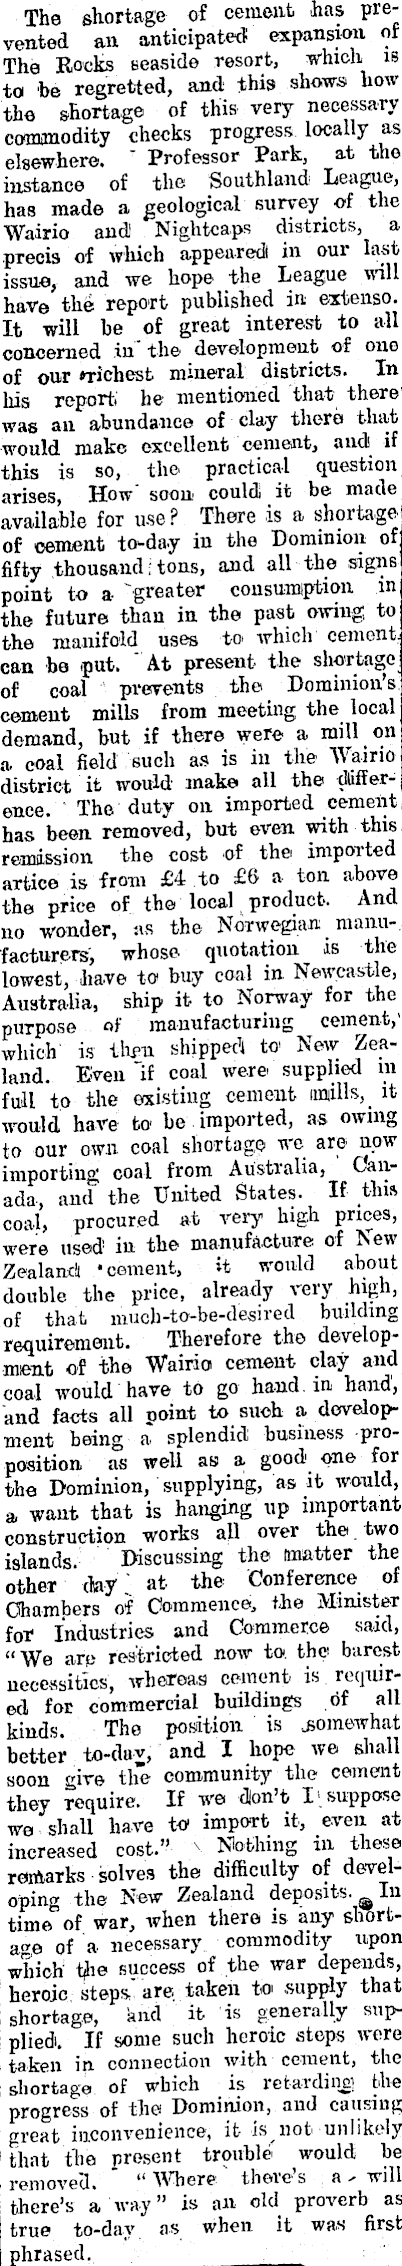 Papers Past | Newspapers | Western Star | 7 December 1920 | THE CEMENT